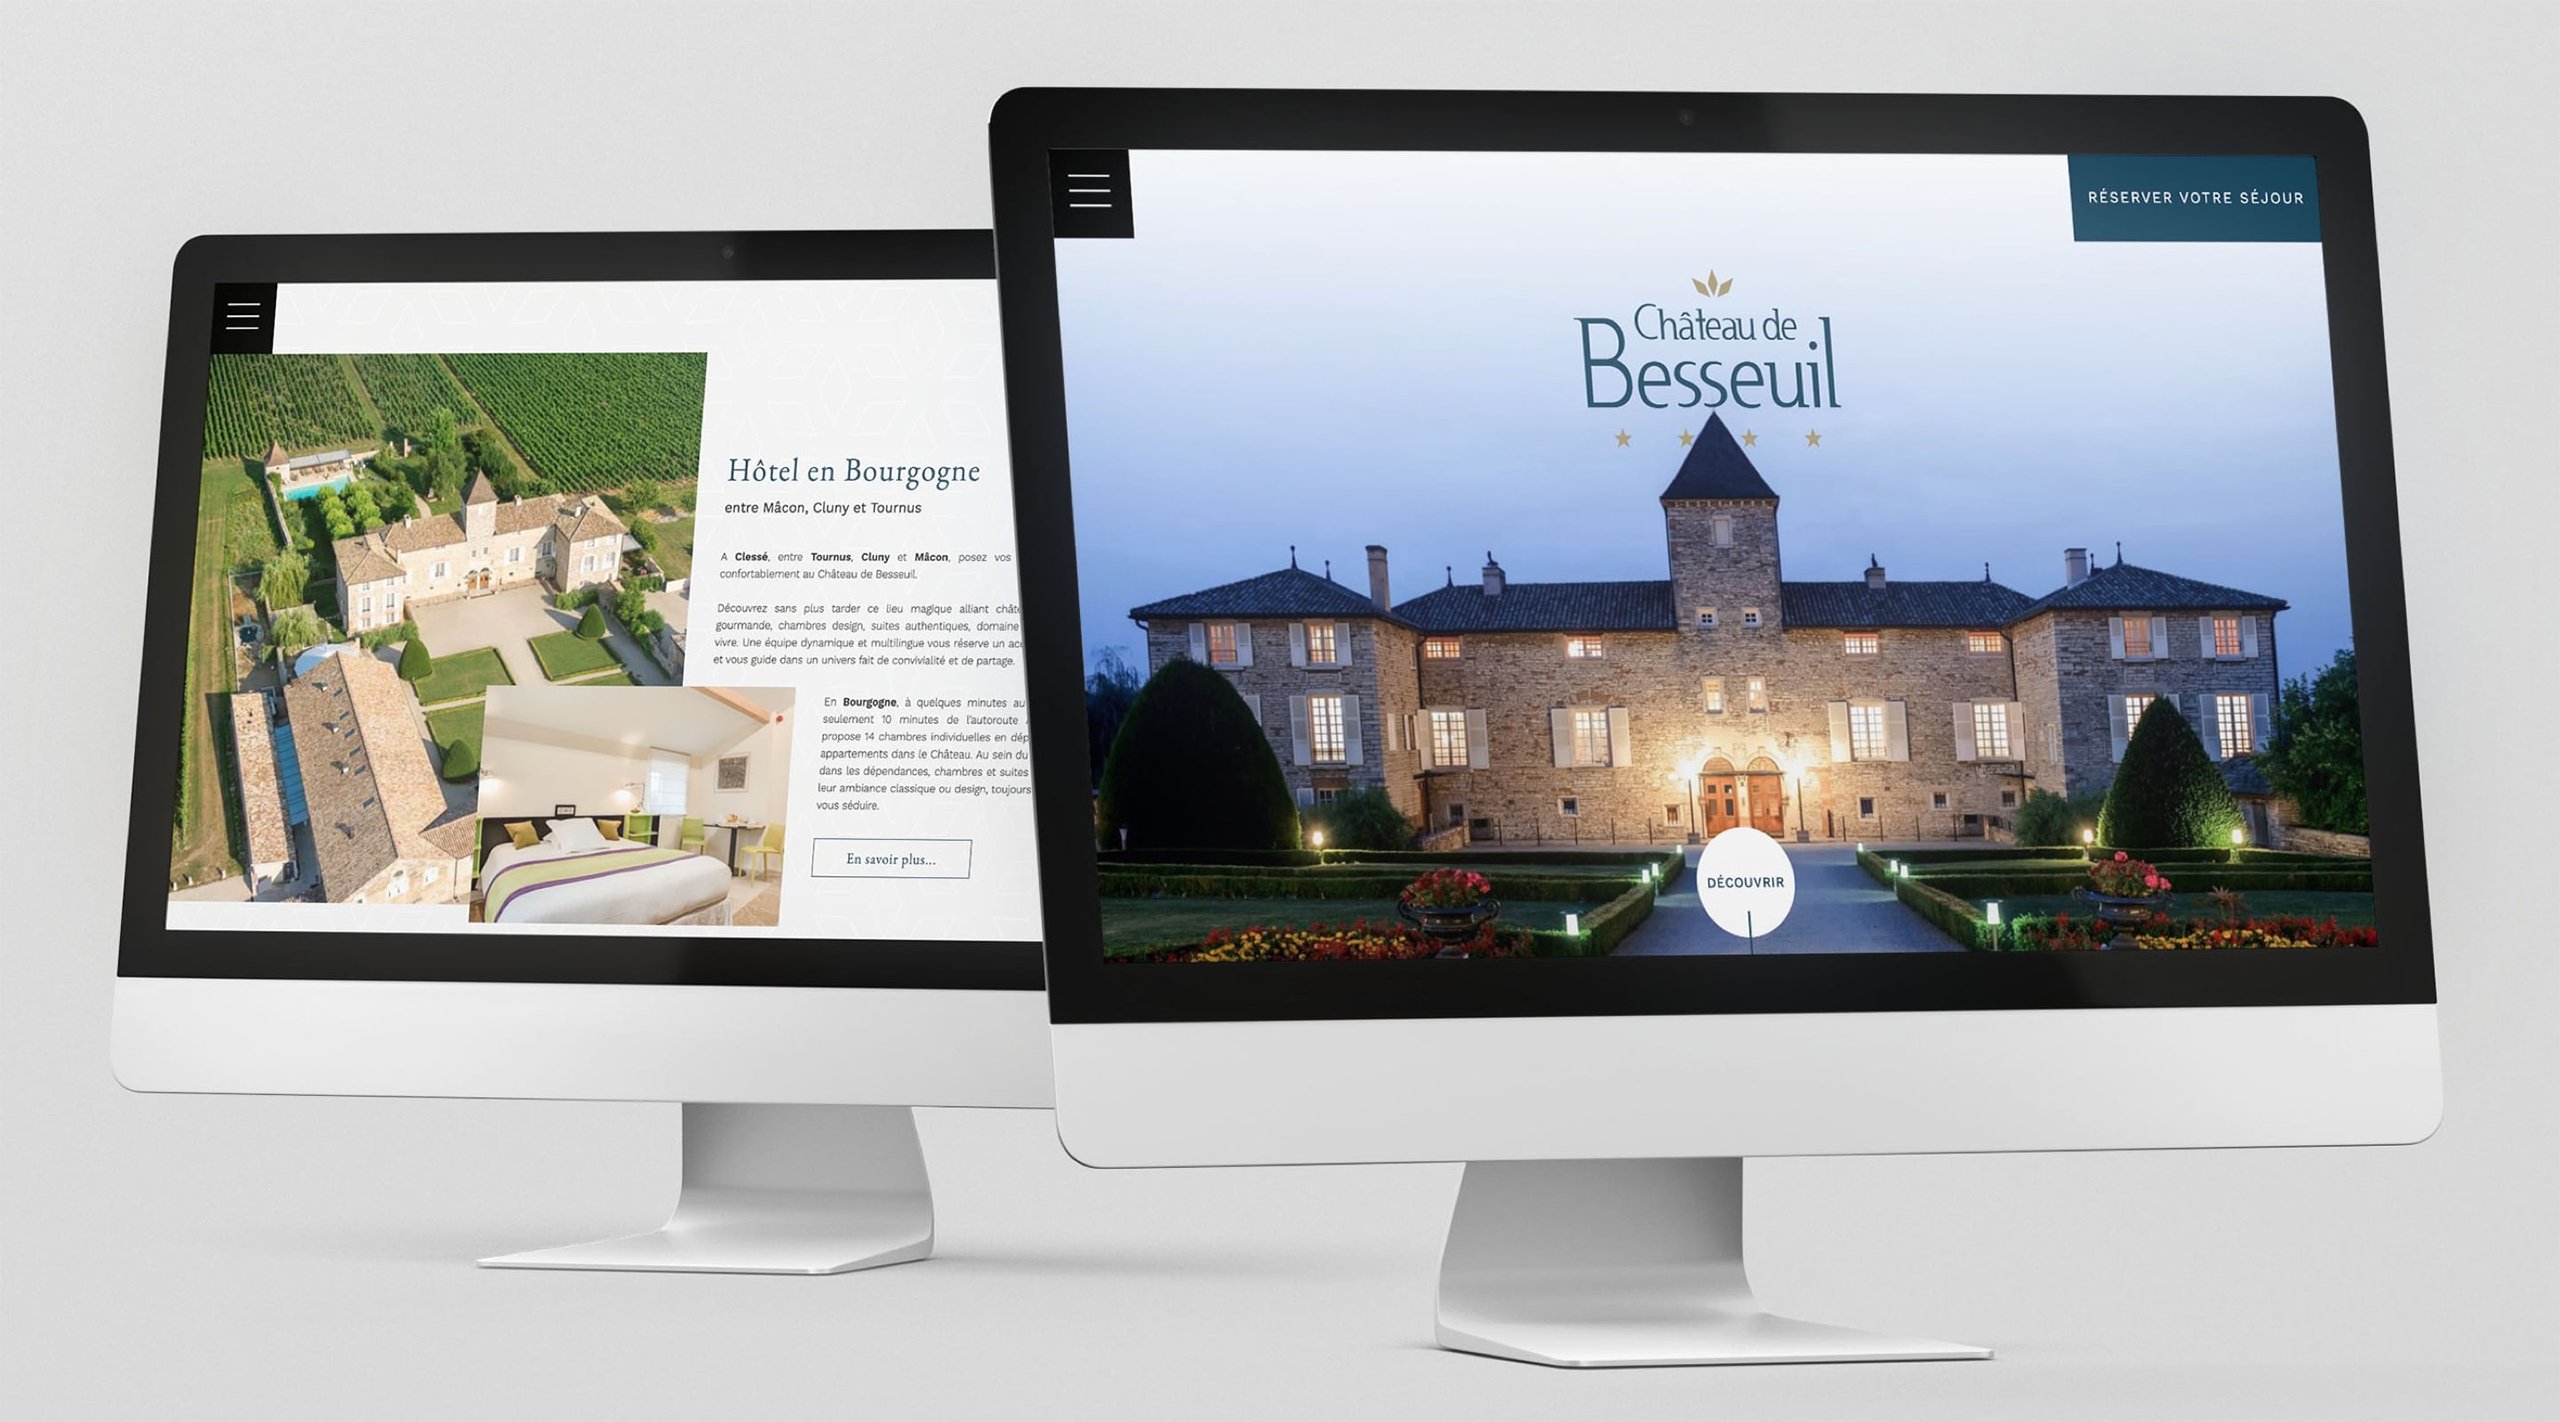 Habefast Study Case Chateau De Besseuil Website Redesign